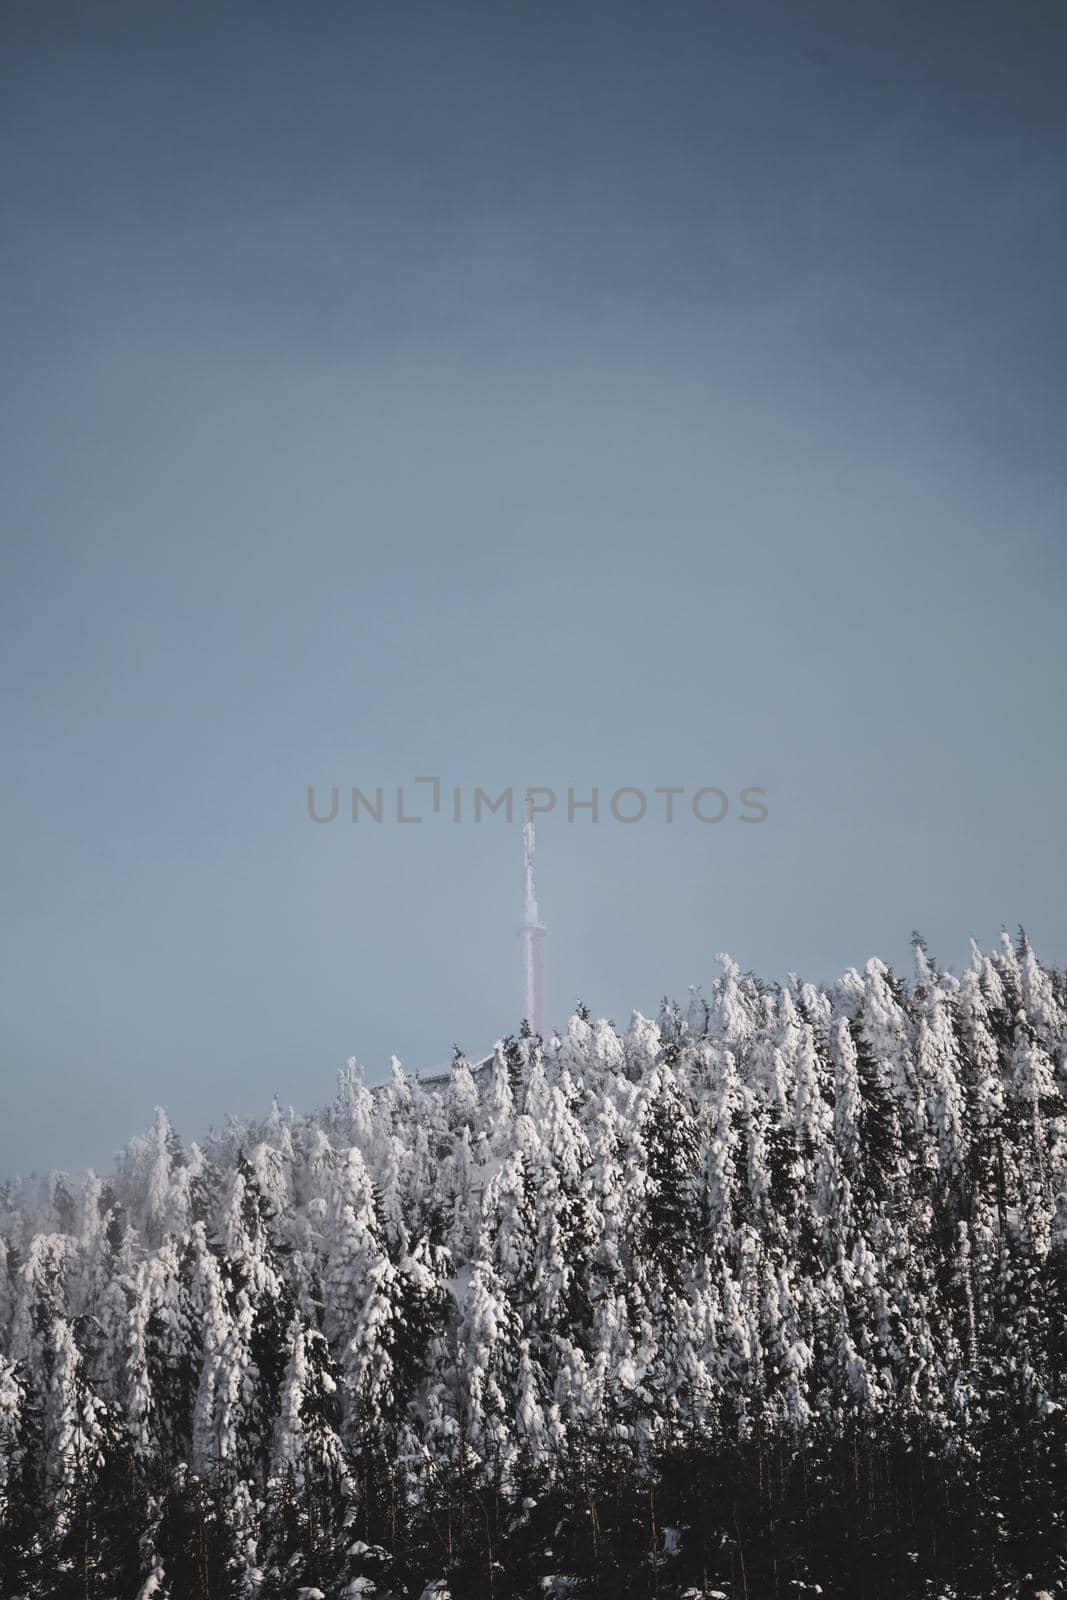 Transmitter at the Top of the Mountain in clouds With Snowy Trees and Blue Sky in Czech Republic by Skrobanek